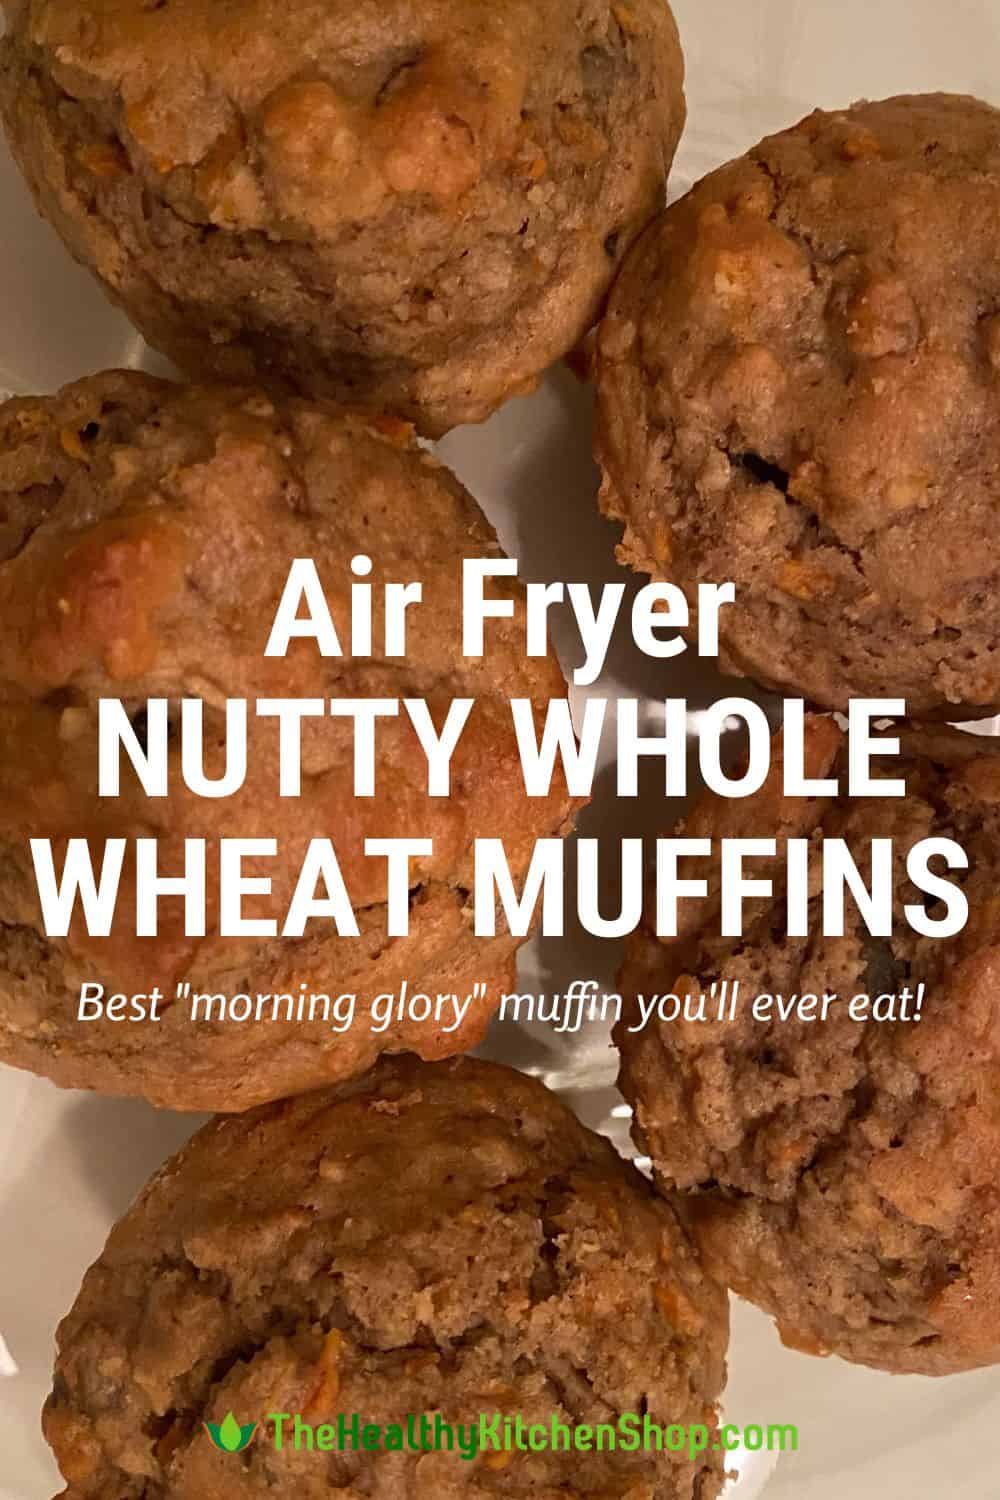 Air Fryer Nutty Whole Wheat Muffins